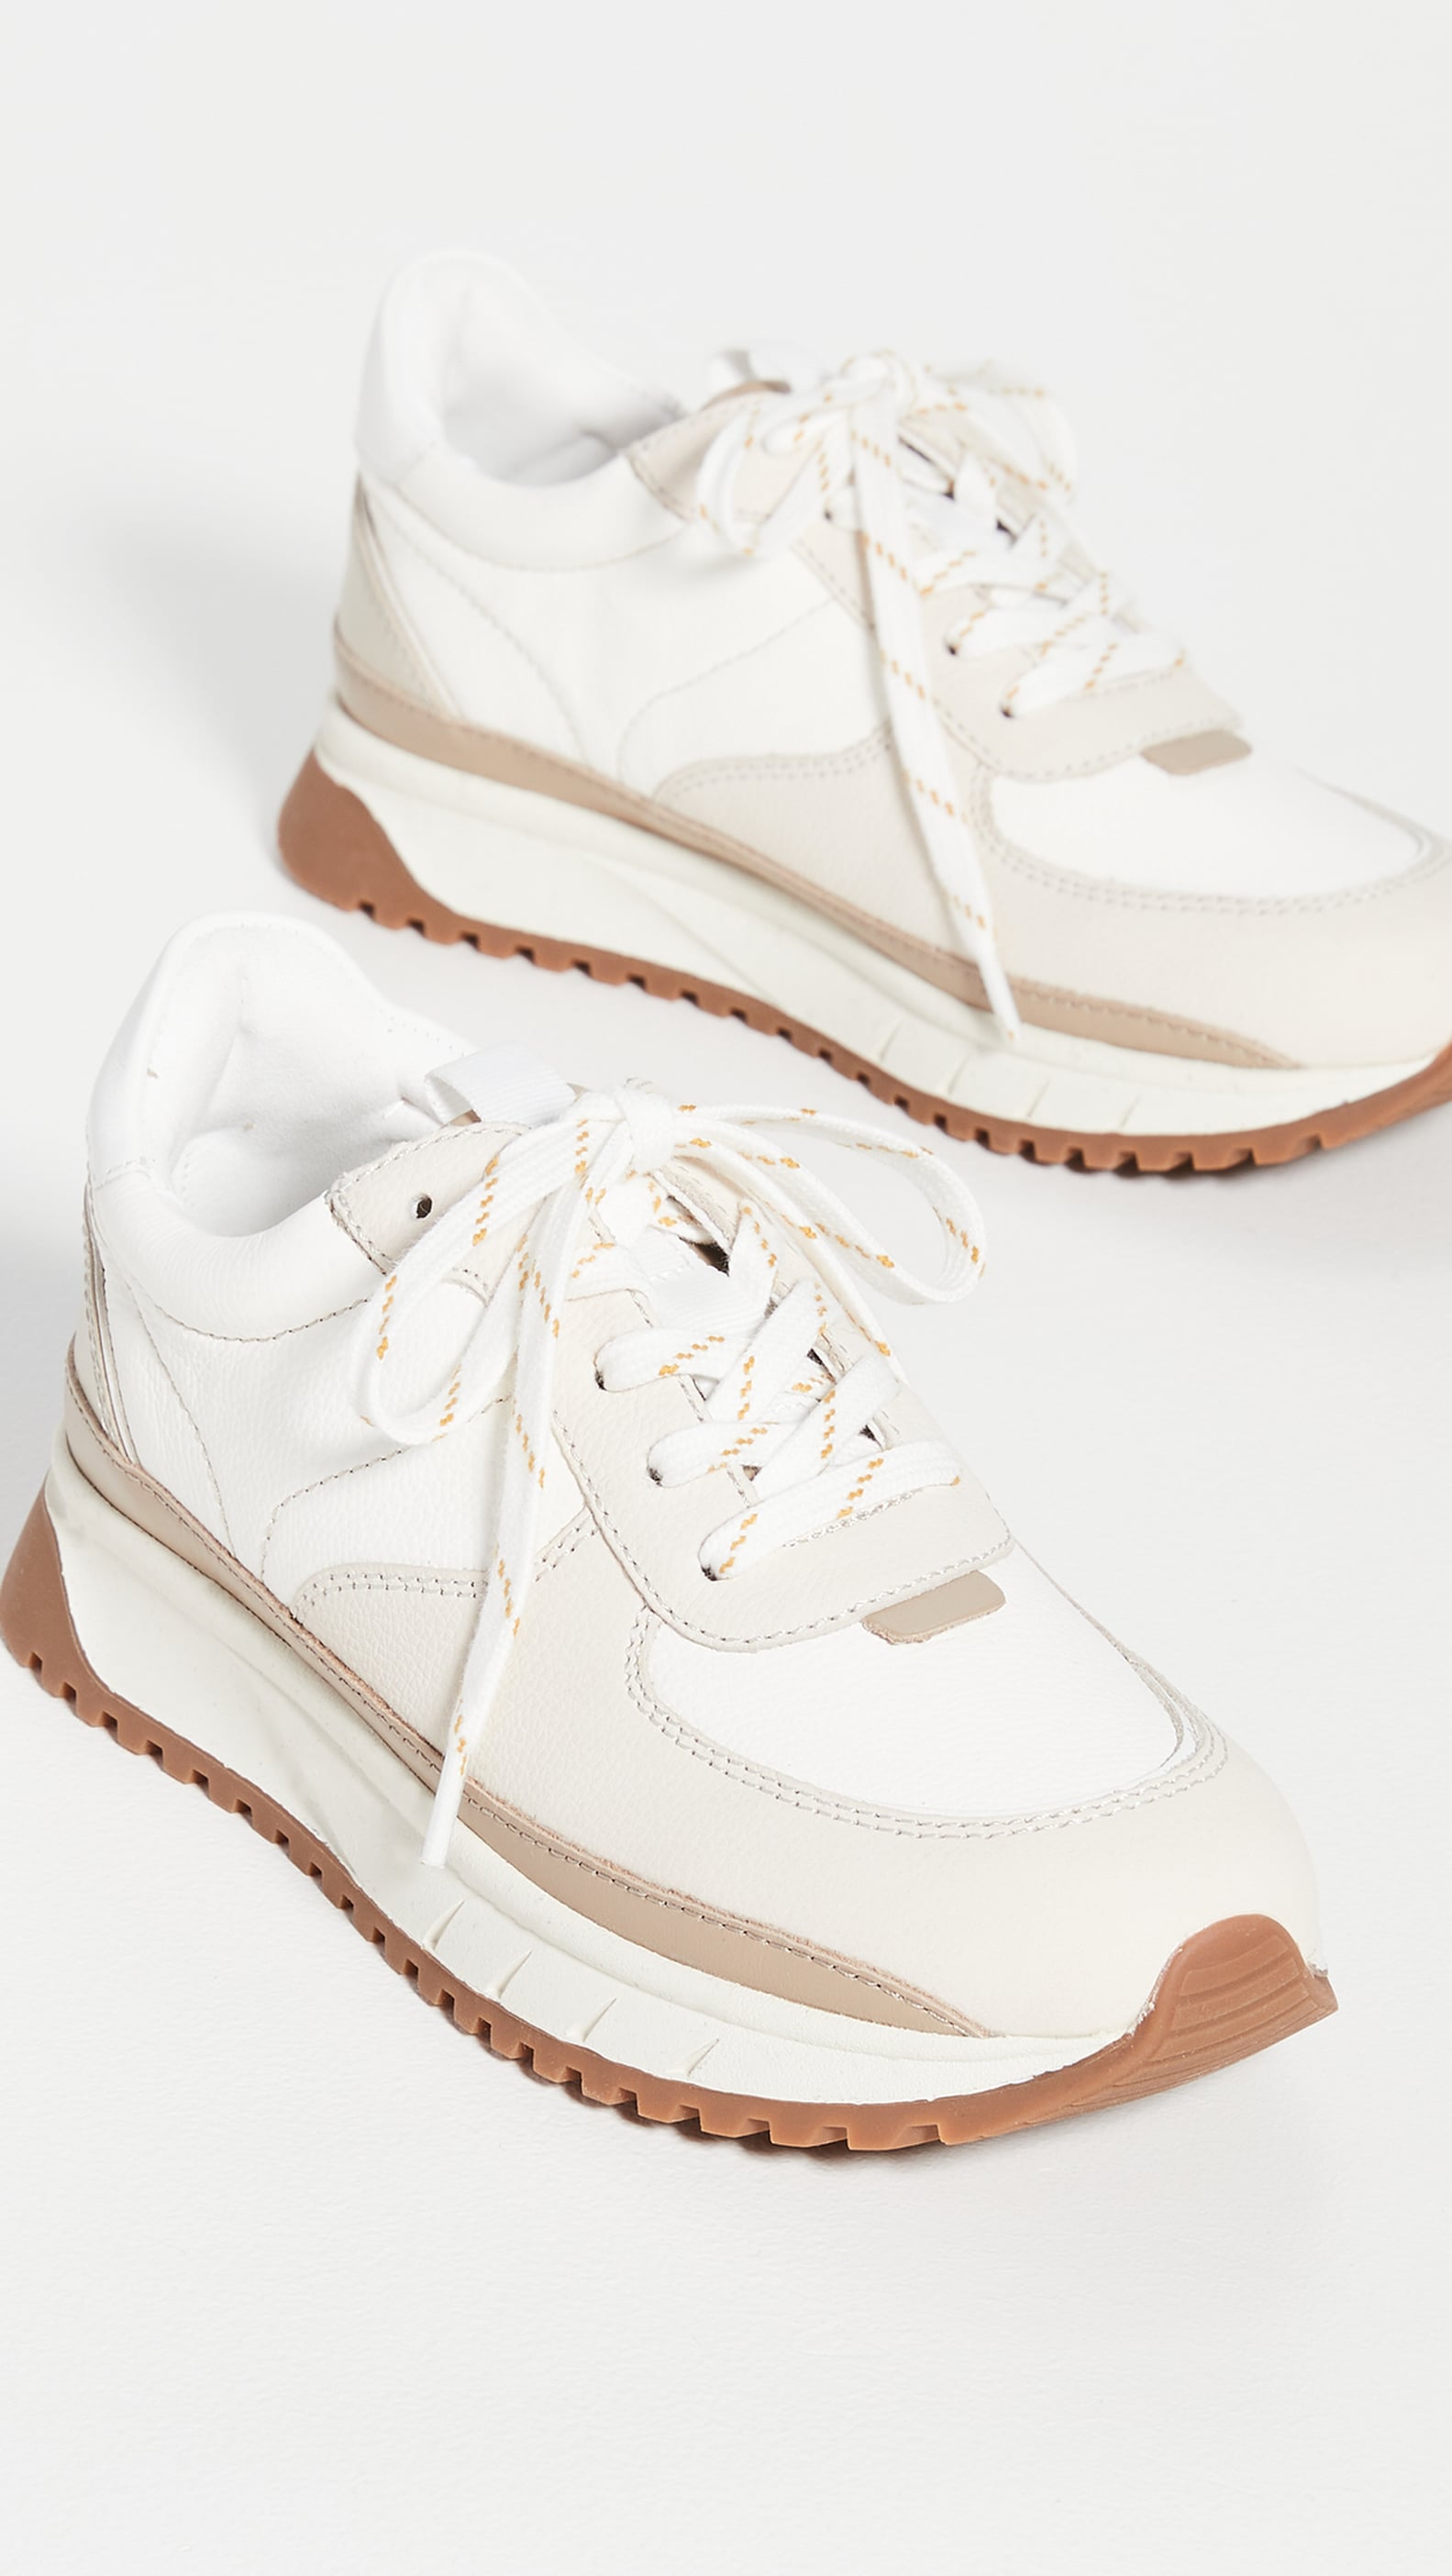 The Best '70s-Inspired Sneakers For Women | POPSUGAR Fashion